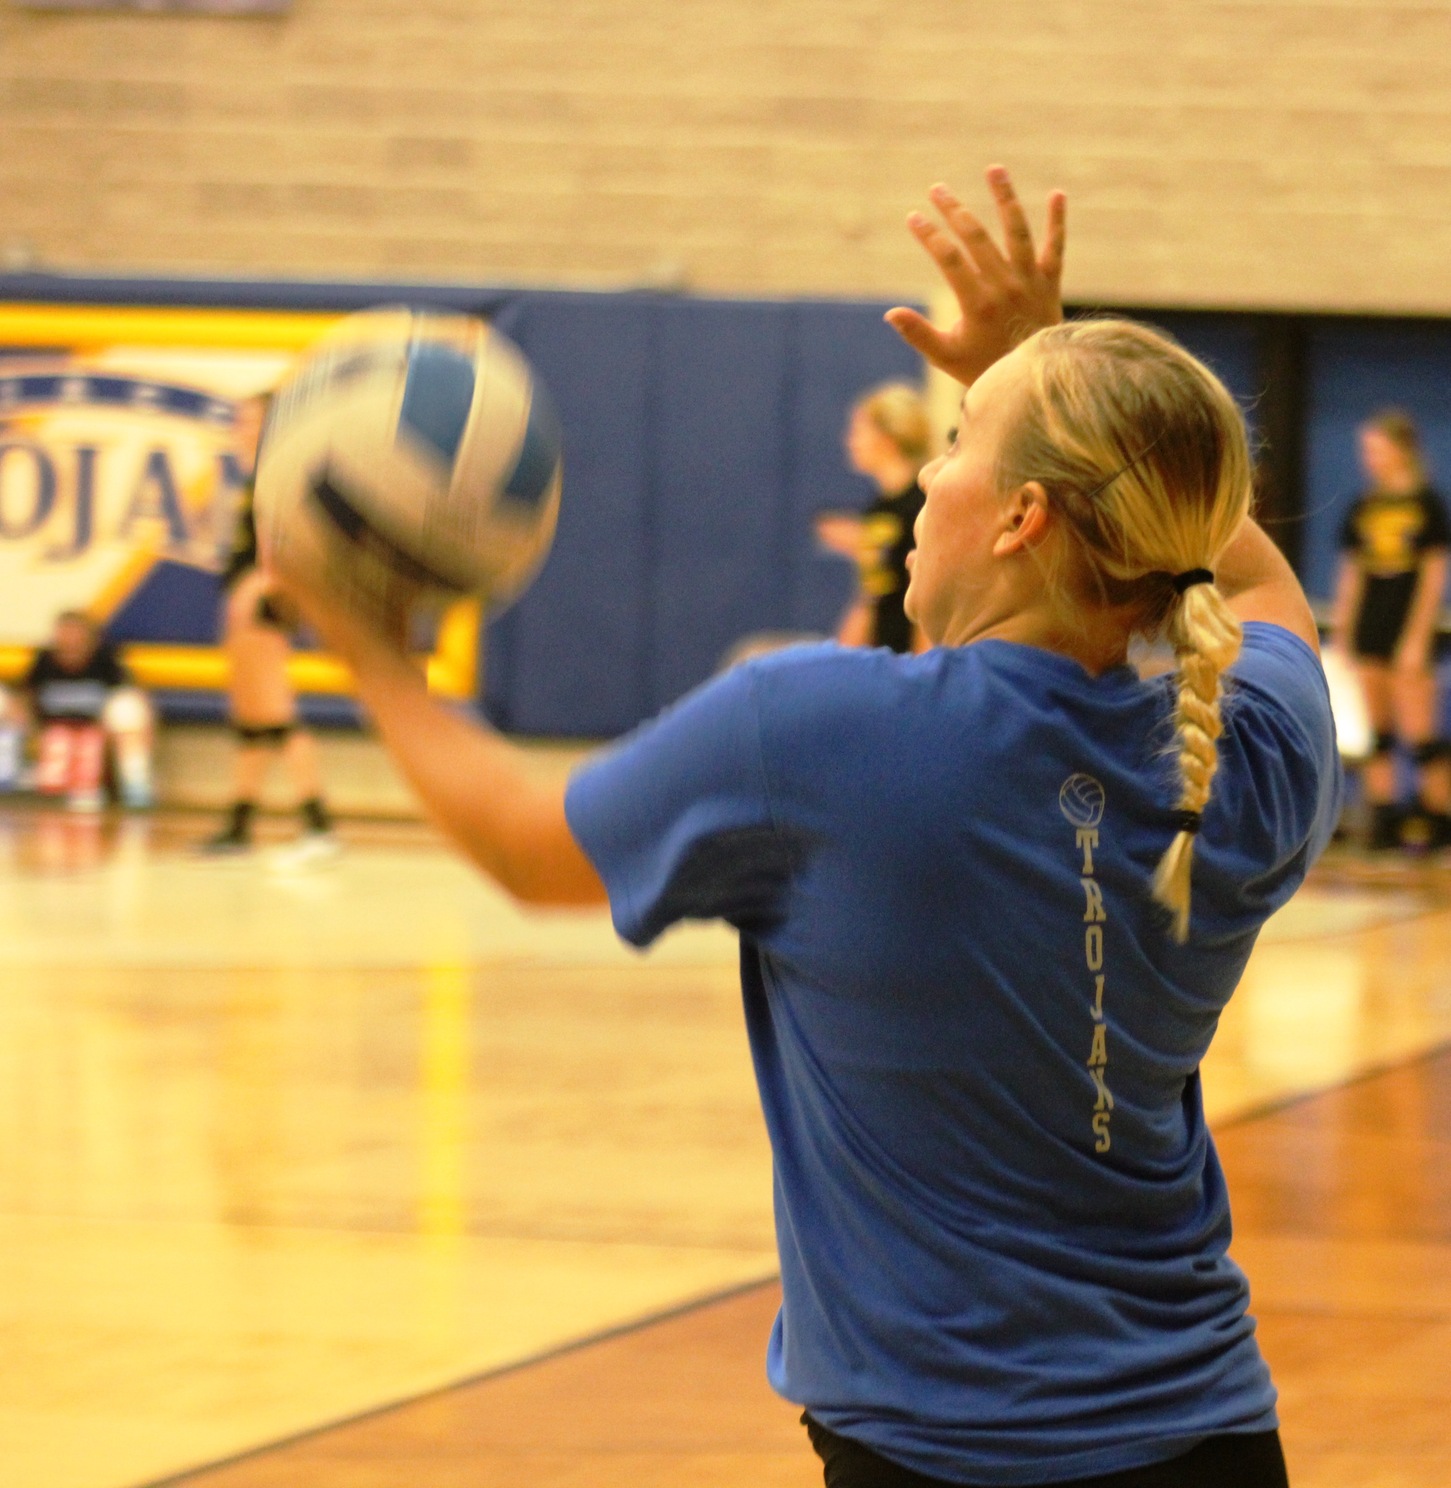 NIACC freshman Sammi Hyde serves during a scrimmage earlier this season in the NIACC gym.